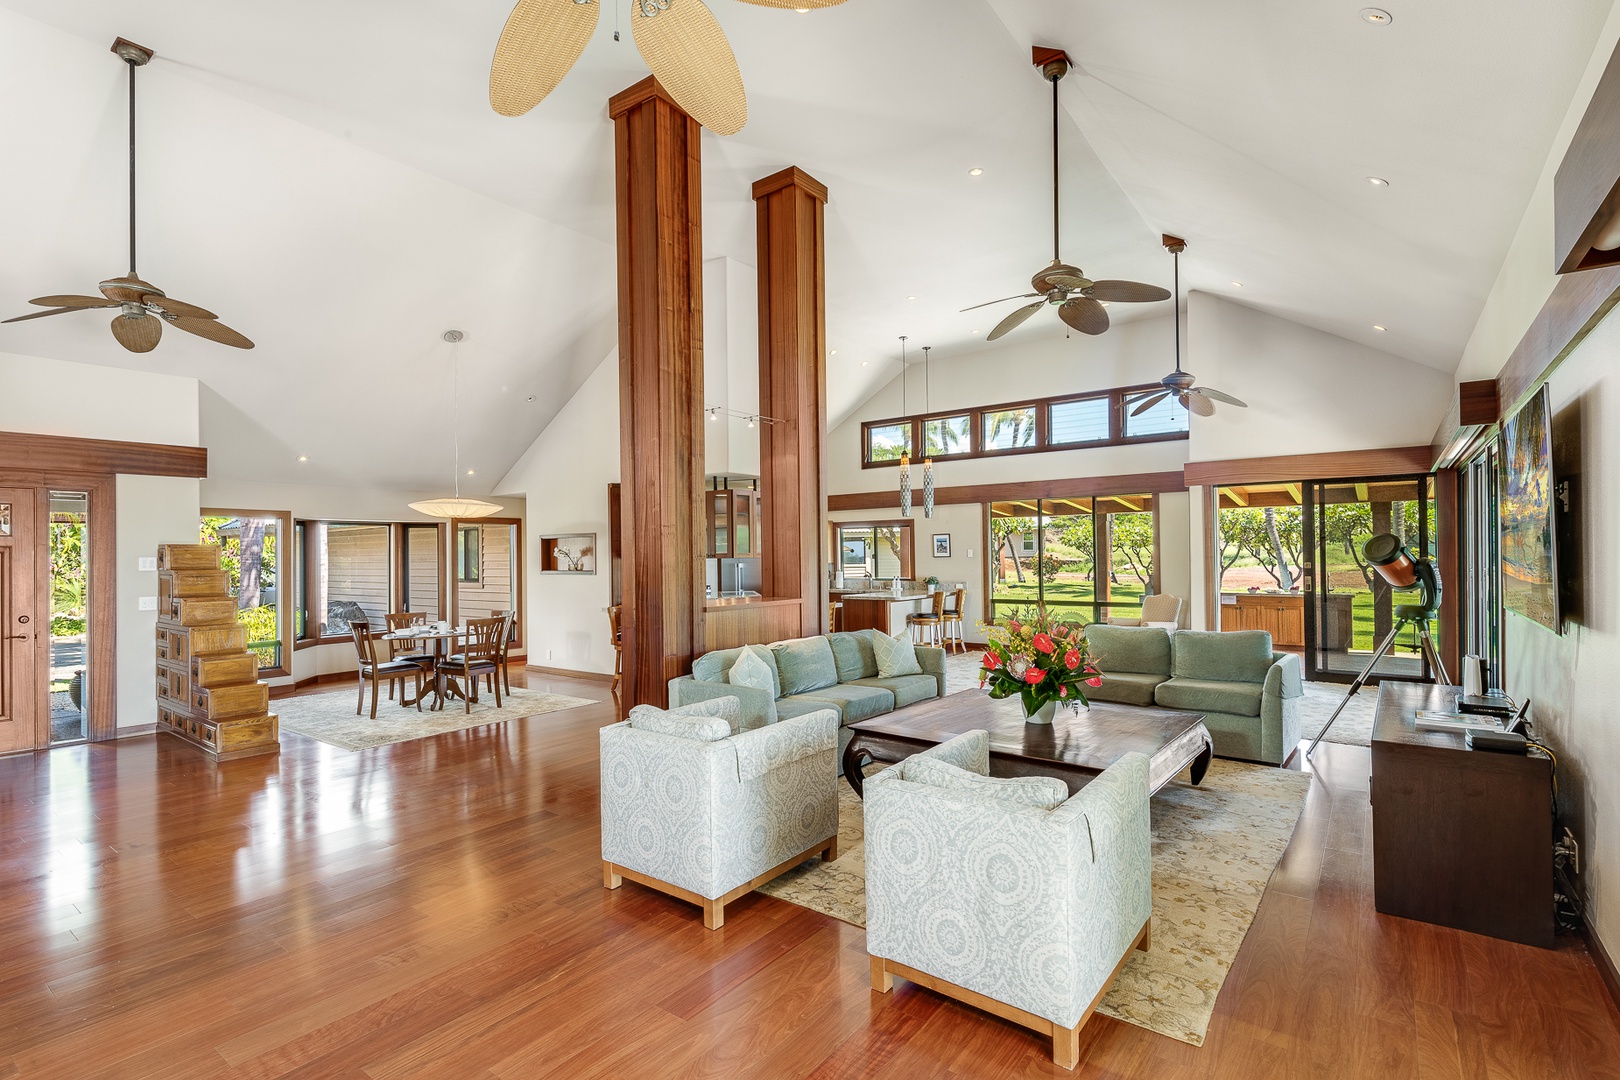 Kamuela Vacation Rentals, Olomana Hale at Kohala Ranch - The living area comes with comfortable chairs and couches to recline and enjoy your favorite shows on the large flatscreen television while peering out towards the pool and ocean views